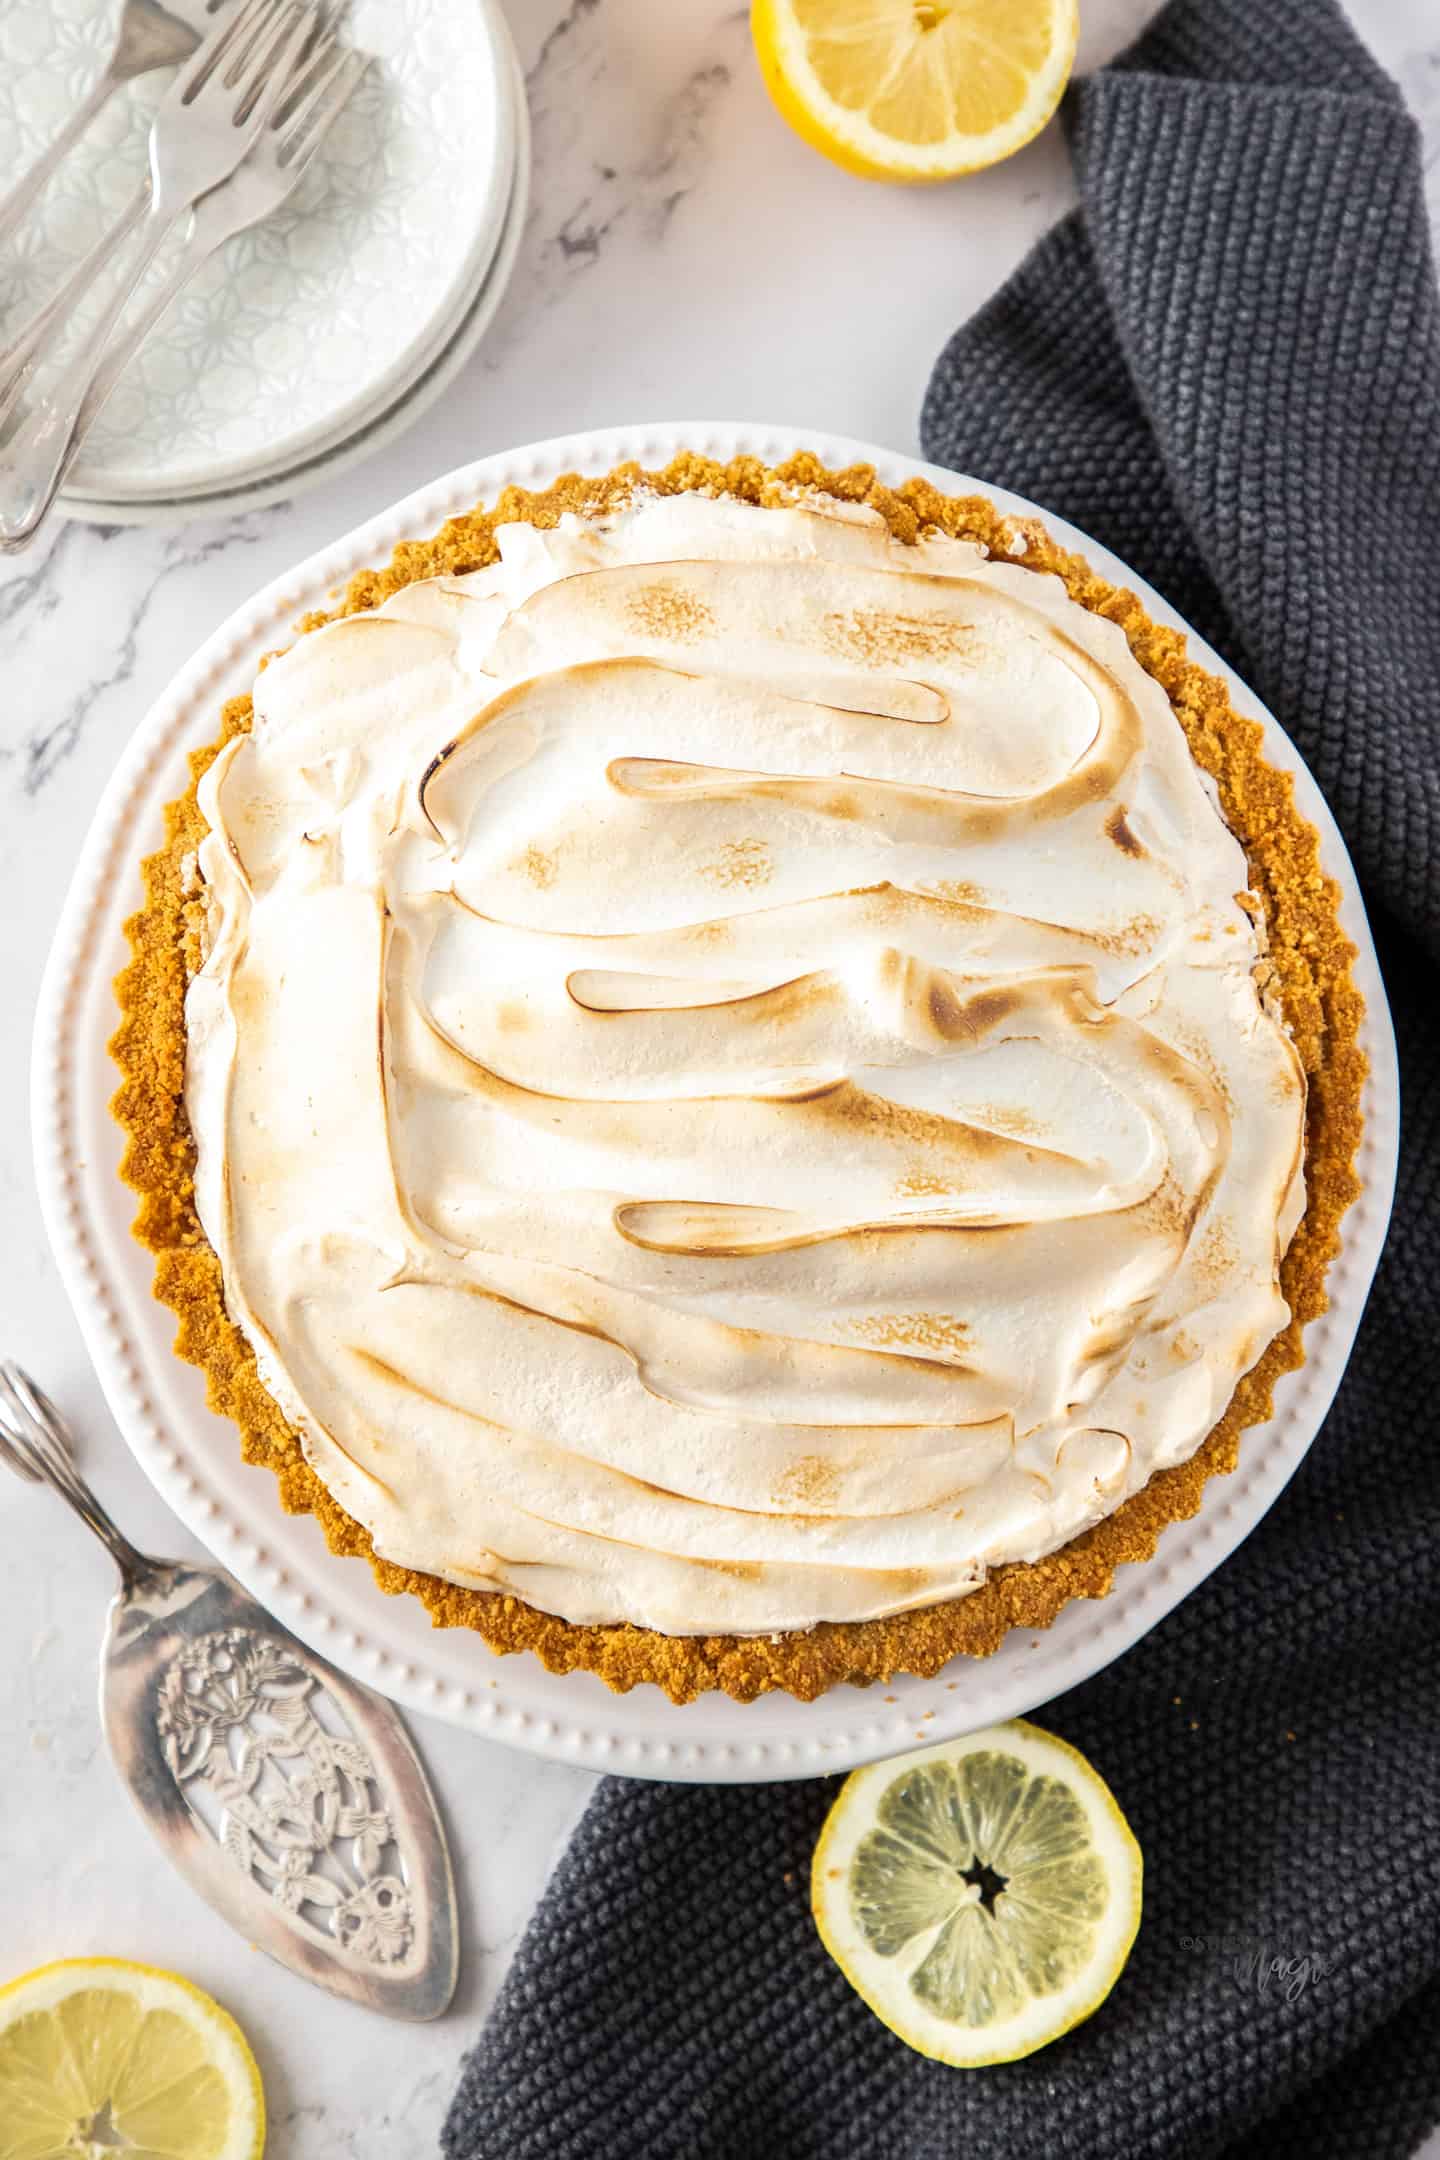 View of the toasted top of a lemon meringue pie.